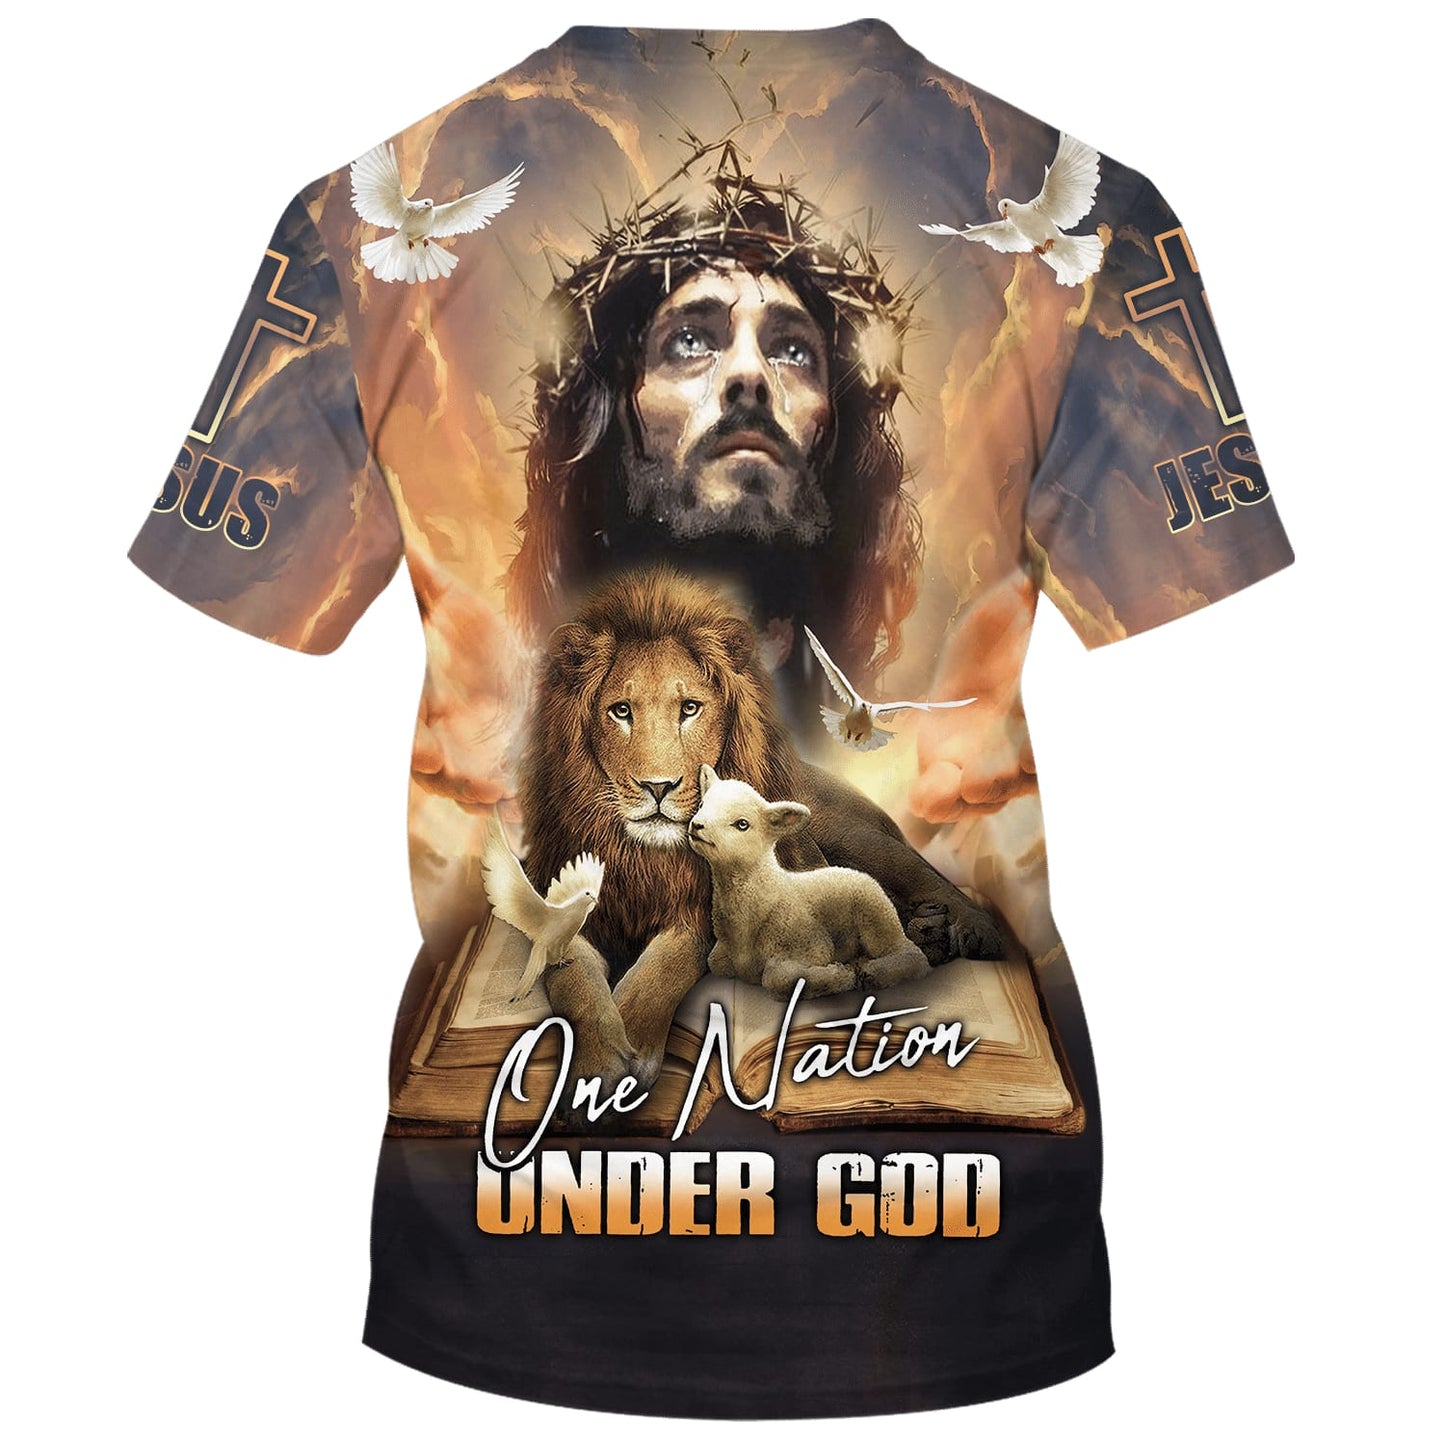 One Nation Under God Shirts - Jesus Lion And The Lamb 3d Shirts - Christian T Shirts For Men And Women